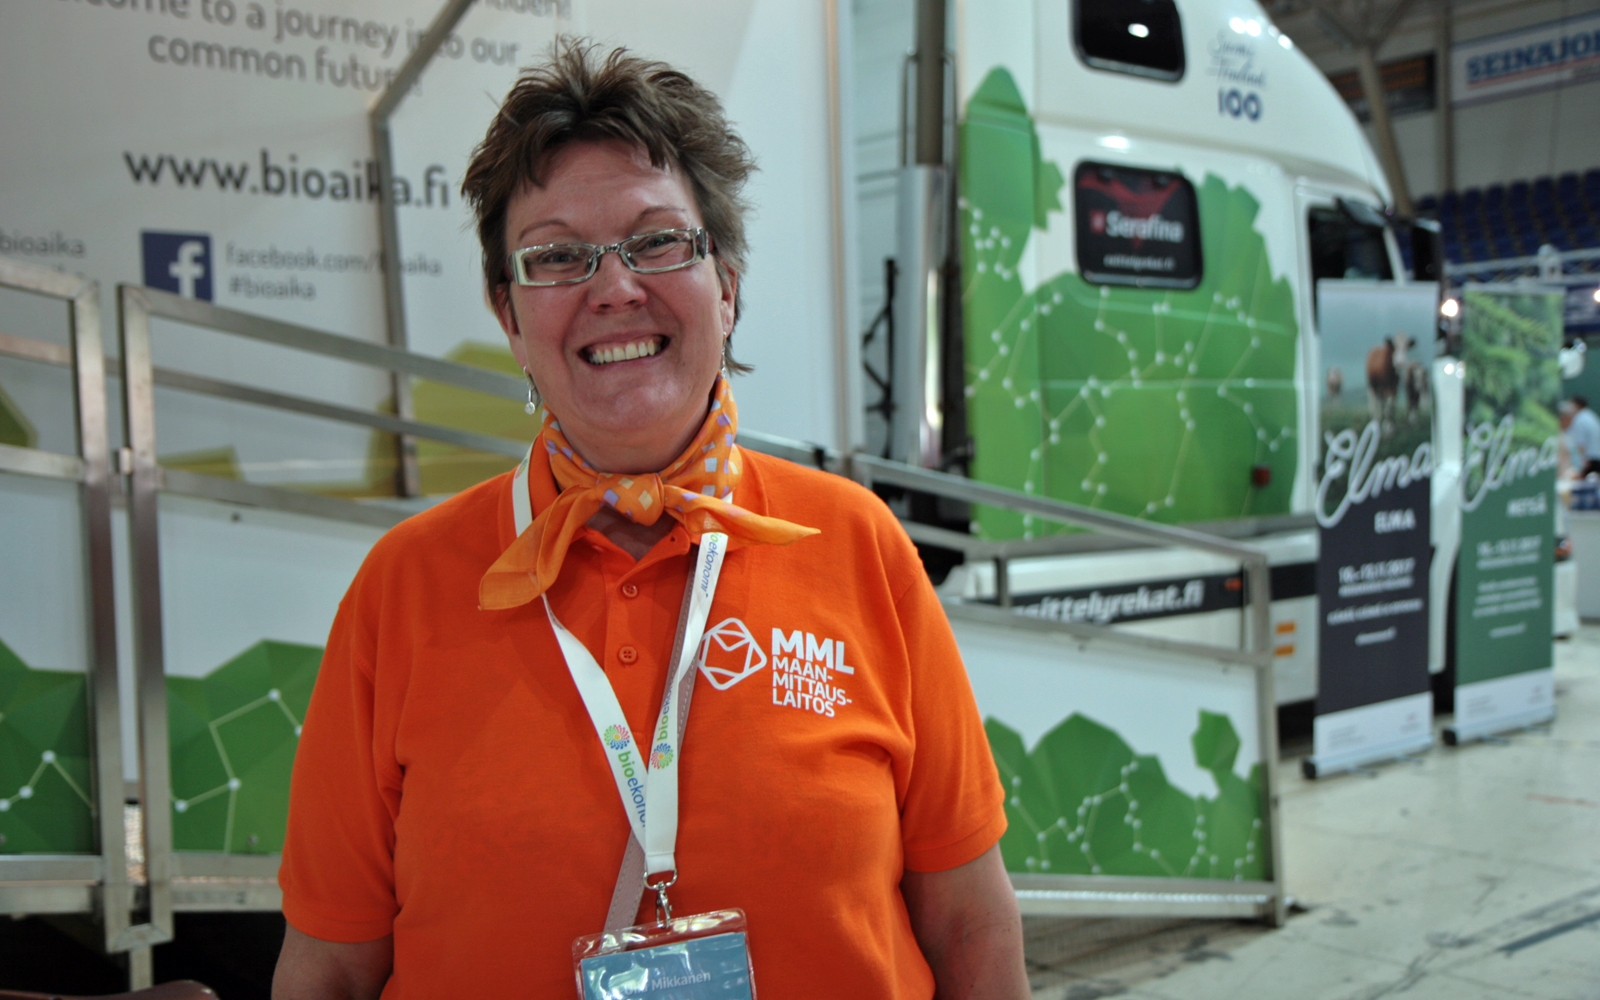 "The lorry shows the great power of co-operation. Different perspectives of bioeconomy have been brought out clearly and in a new way,” says Ulla Mikkonen, who popped in to see the Bio Era exhibition while working at the neighbouring stand of the National Land Survey of Finland. Photo: Anna Kauppi